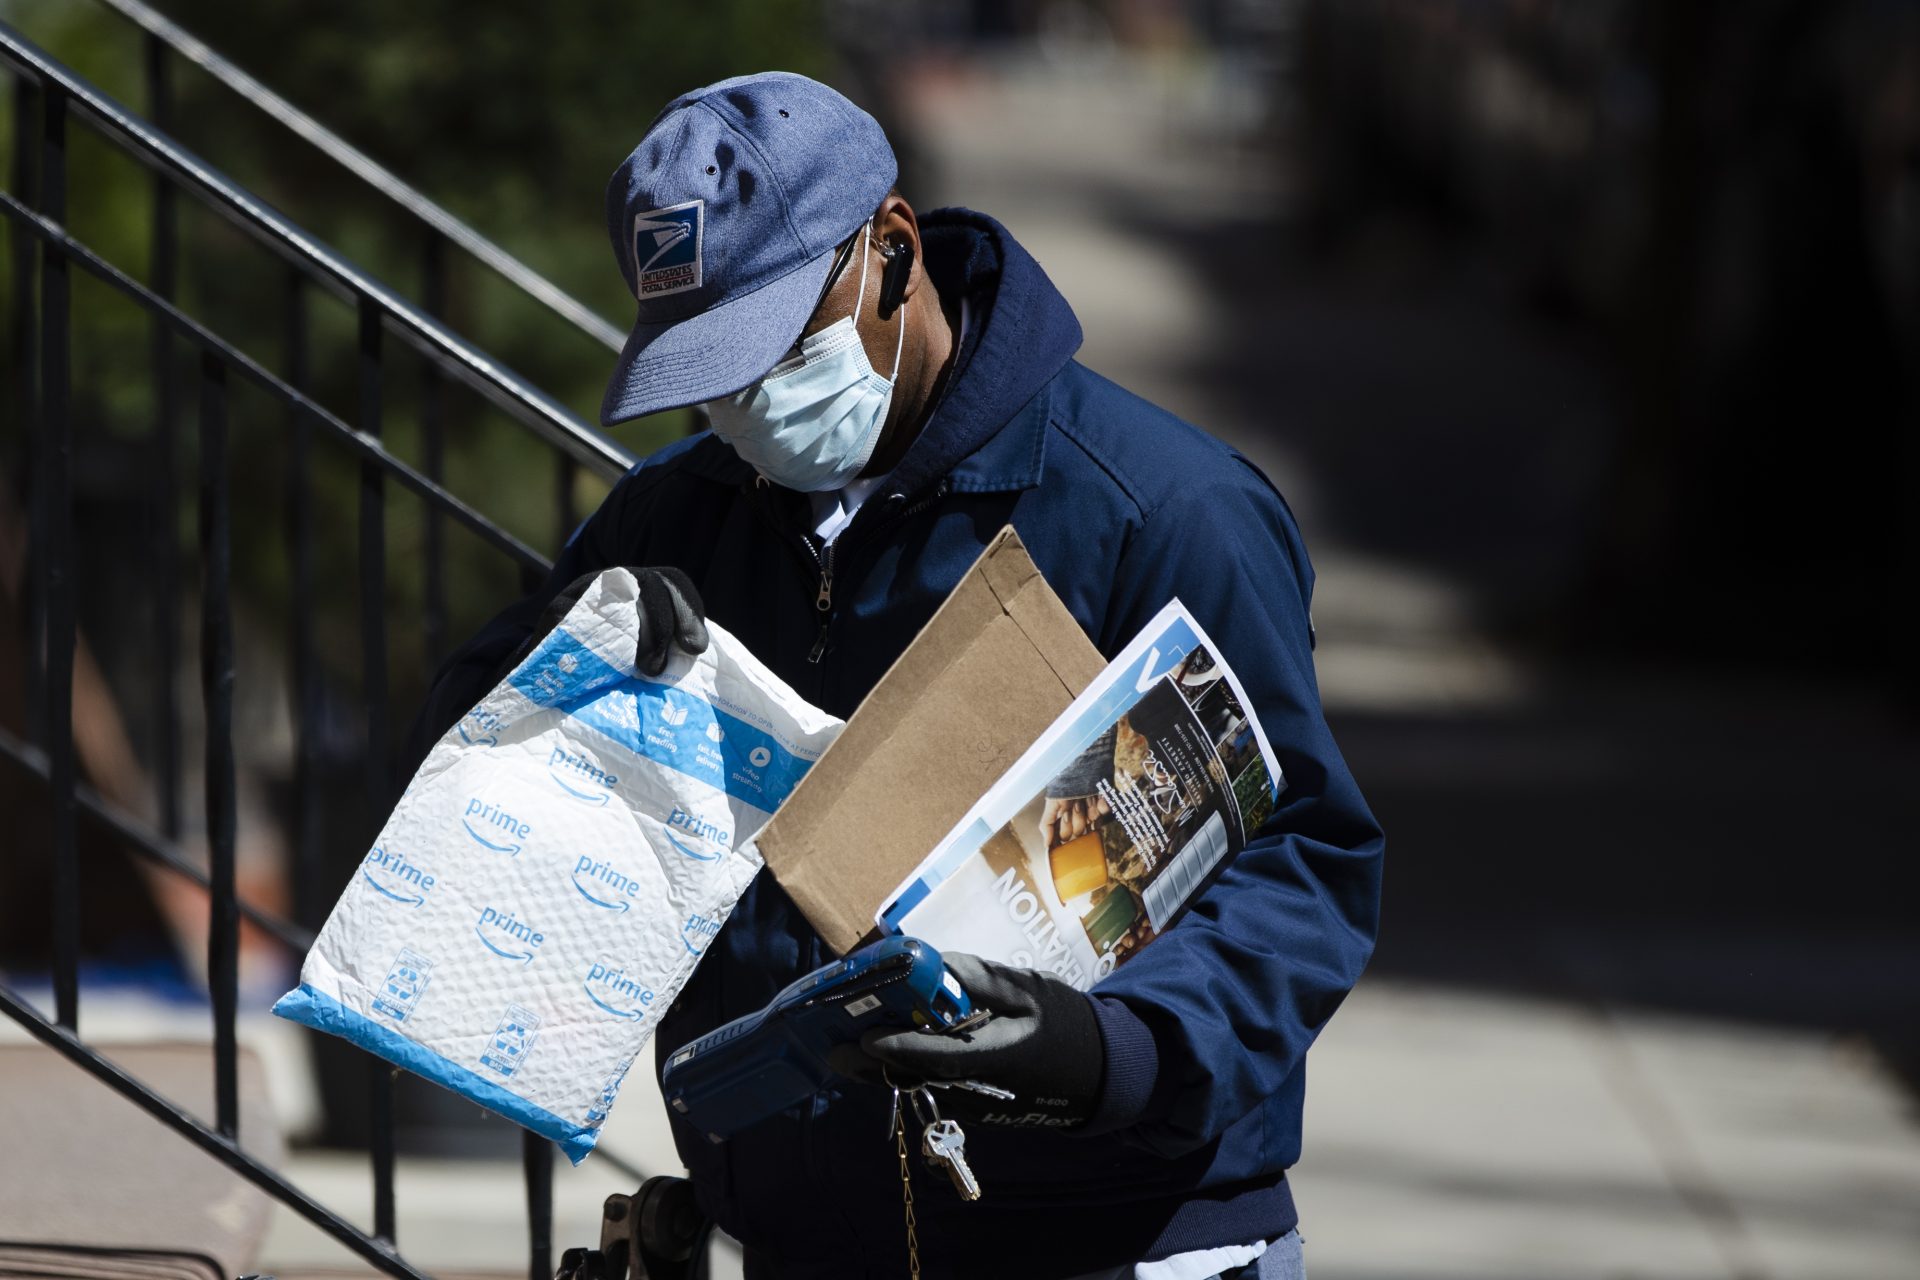 A United States Postal worker makes a delivery with gloves and a mask in Philadelphia, Thursday, April 2, 2020. The U.S. Postal Service is keeping post offices open but ensuring customers stay at least 6 feet (2 meters) apart. The agency said it is following guidance from public health experts, although there is no indication that the new coronavirus COVID-19 is being spread through the mail.